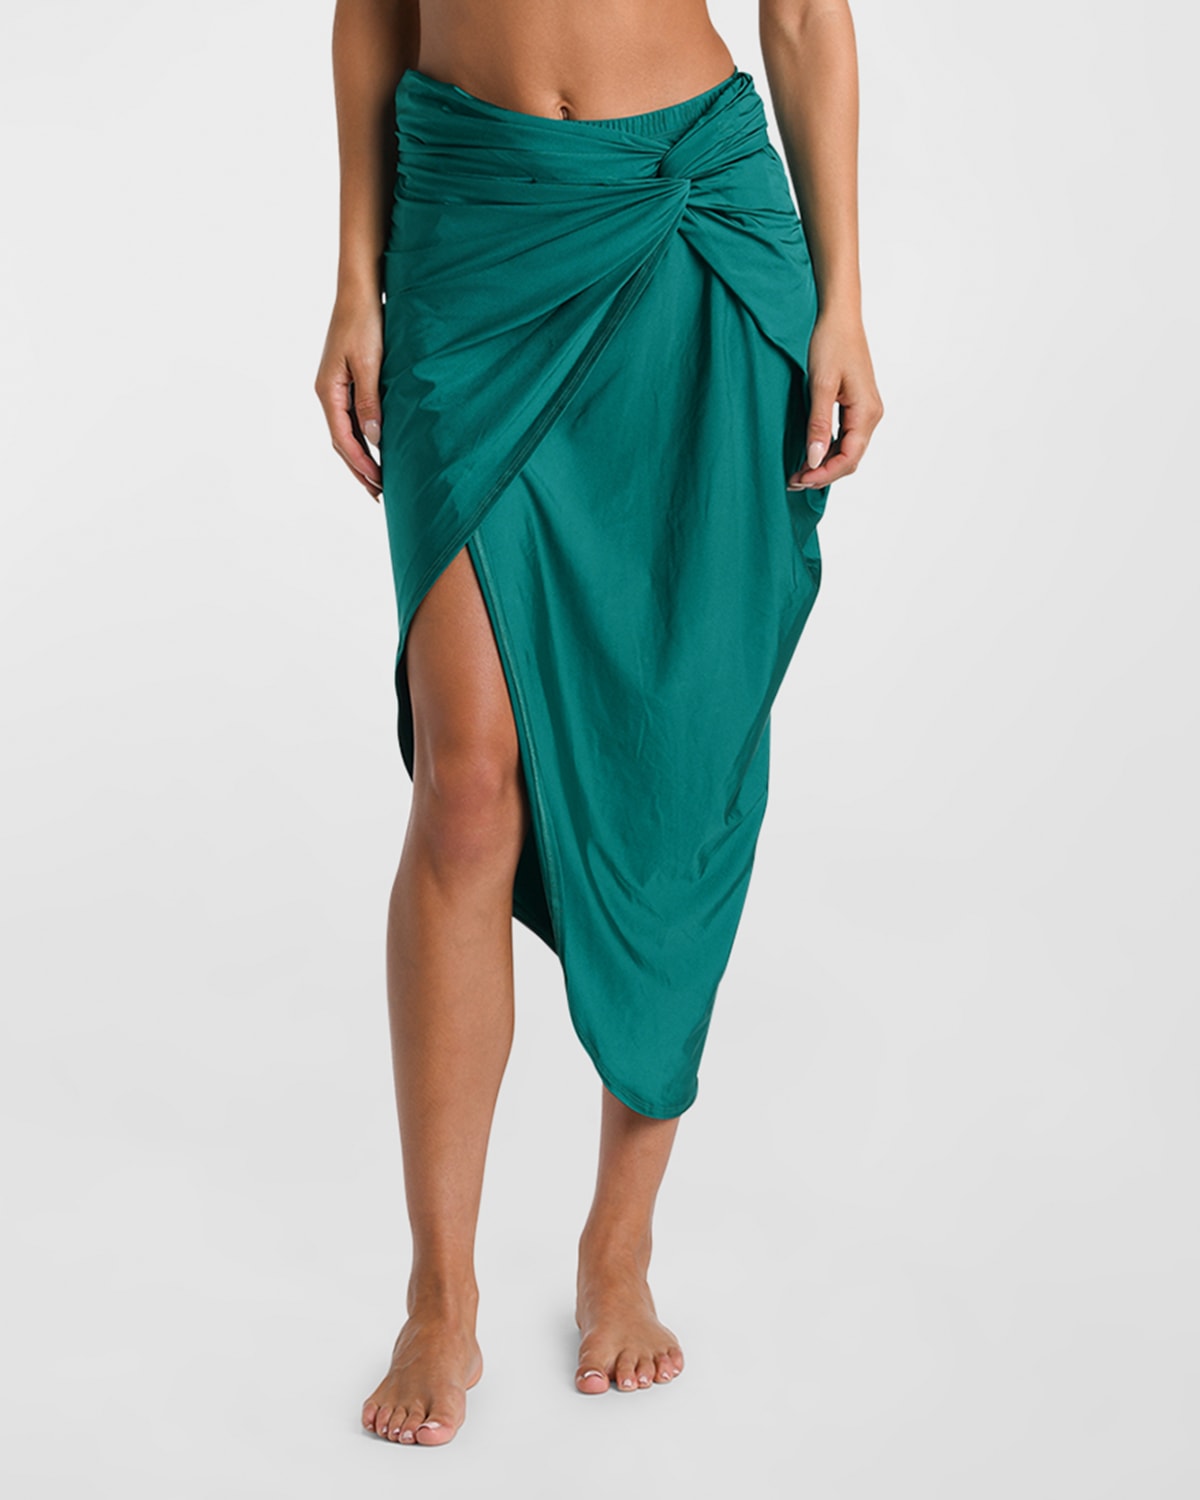 Sunshine 79 Gypset Convertible Faux Wrap Coverup In Jade